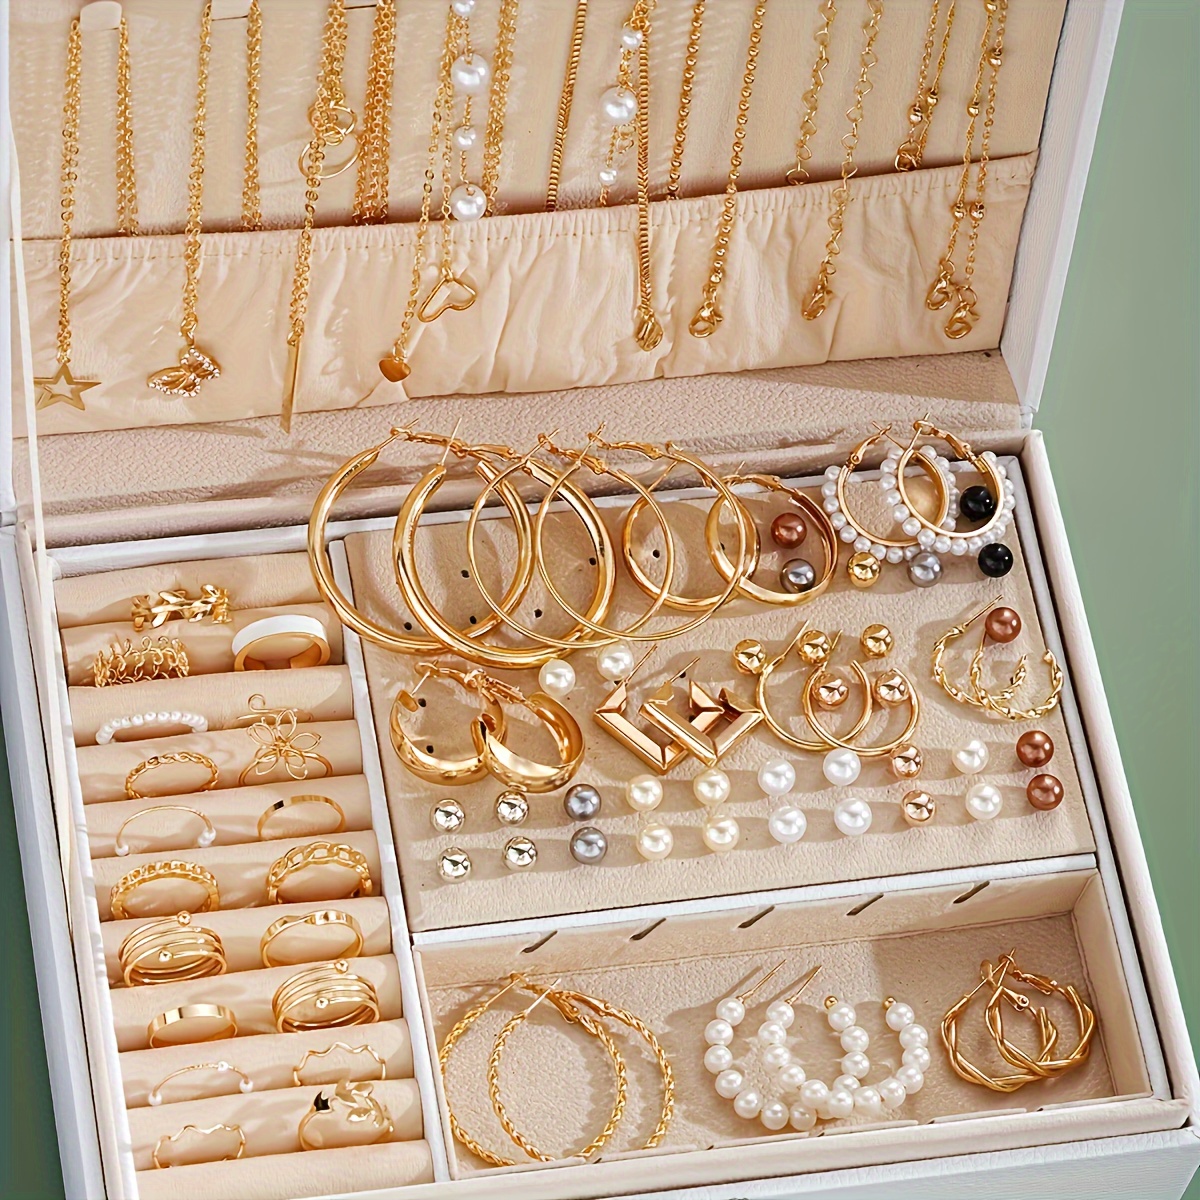 

86pcs/set Elegant Vintage Jewelry Set, Multi-layer Necklaces, Earrings, Rings, 4-in-1 Combo For Women, Ideal For Daily, Commute, Mother's Day, Valentine's Gift (box Not Included)